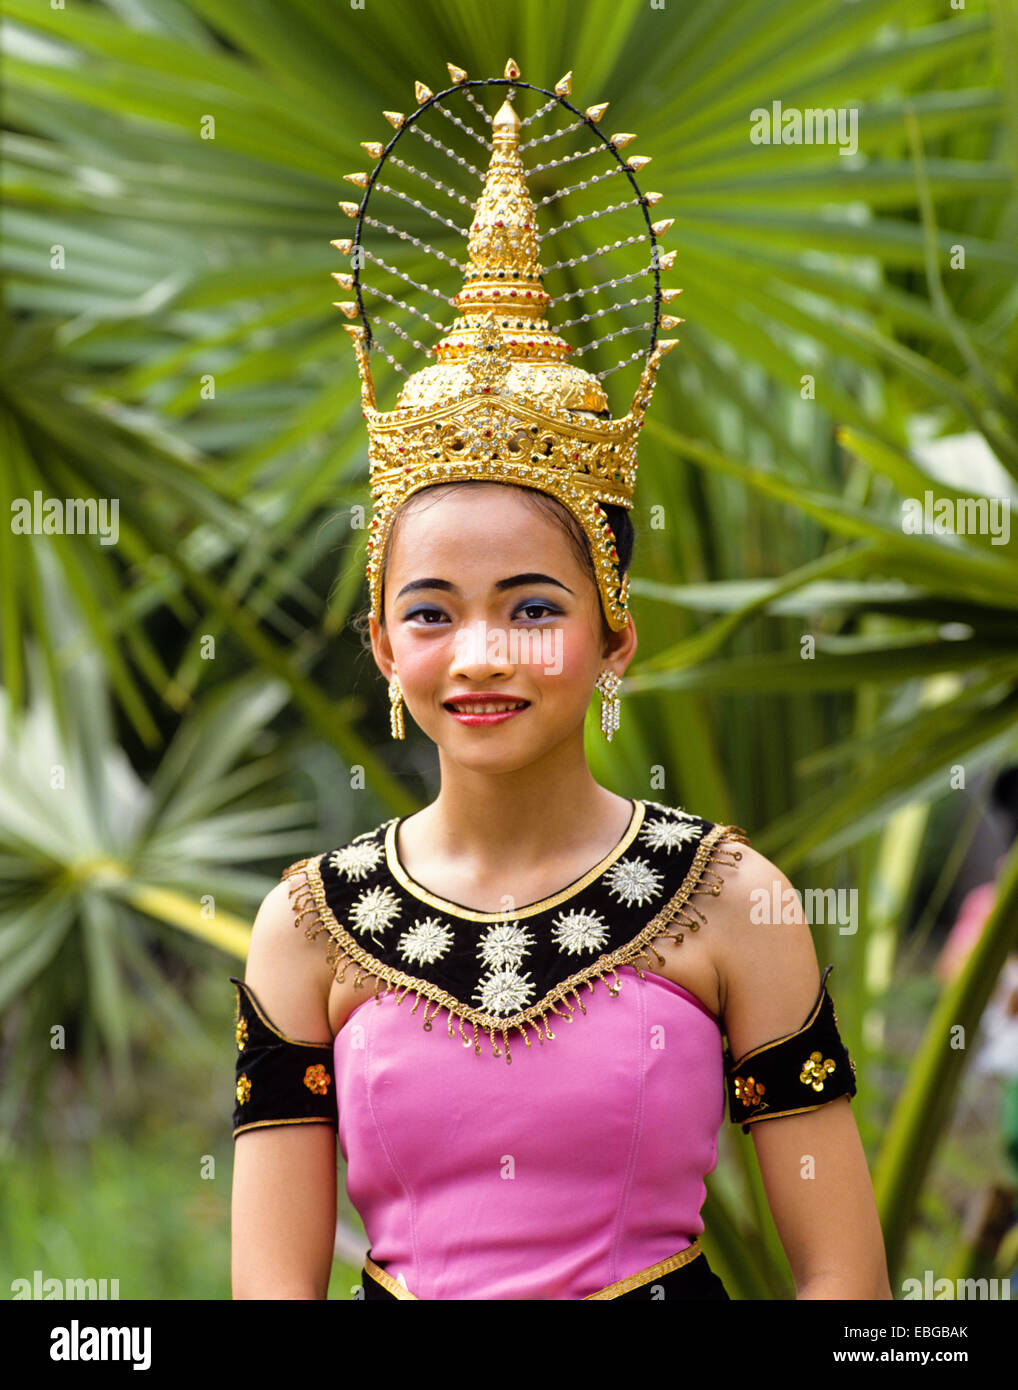 Young woman wearing a traditional costume, Sukhothai style, Sukhothai ...